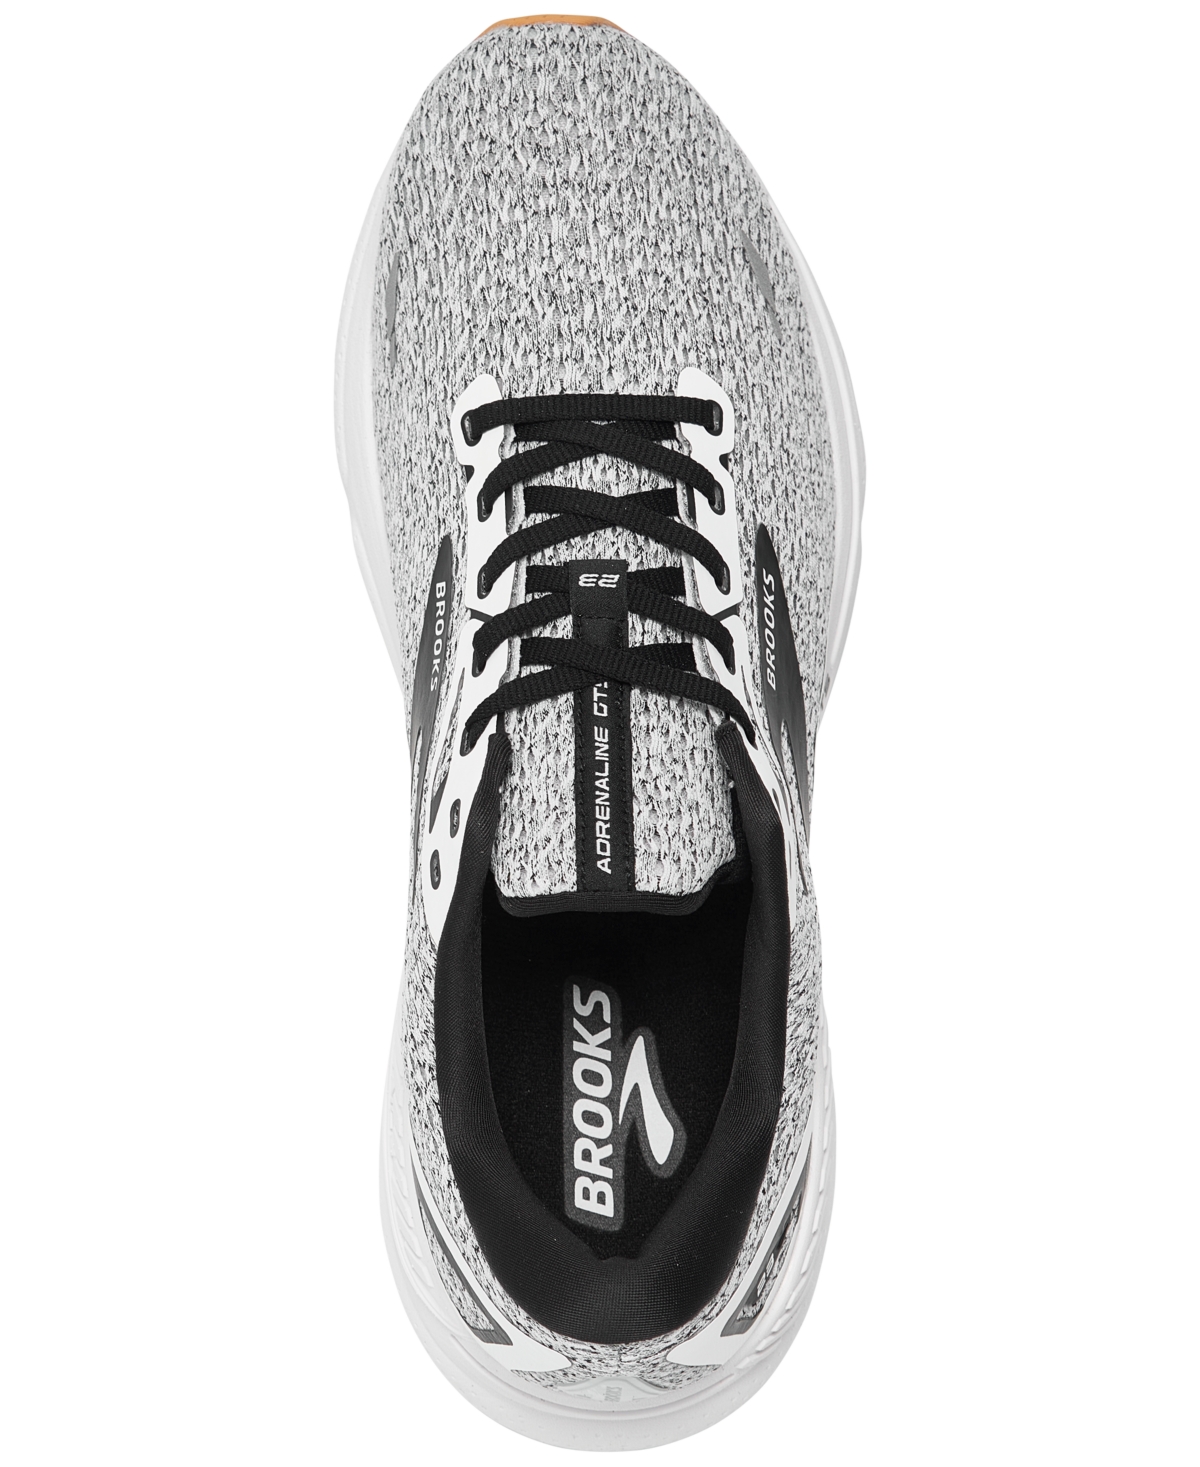 Shop Brooks Men's Adrenaline Gts 23 Running Sneakers From Finish Line In White,black